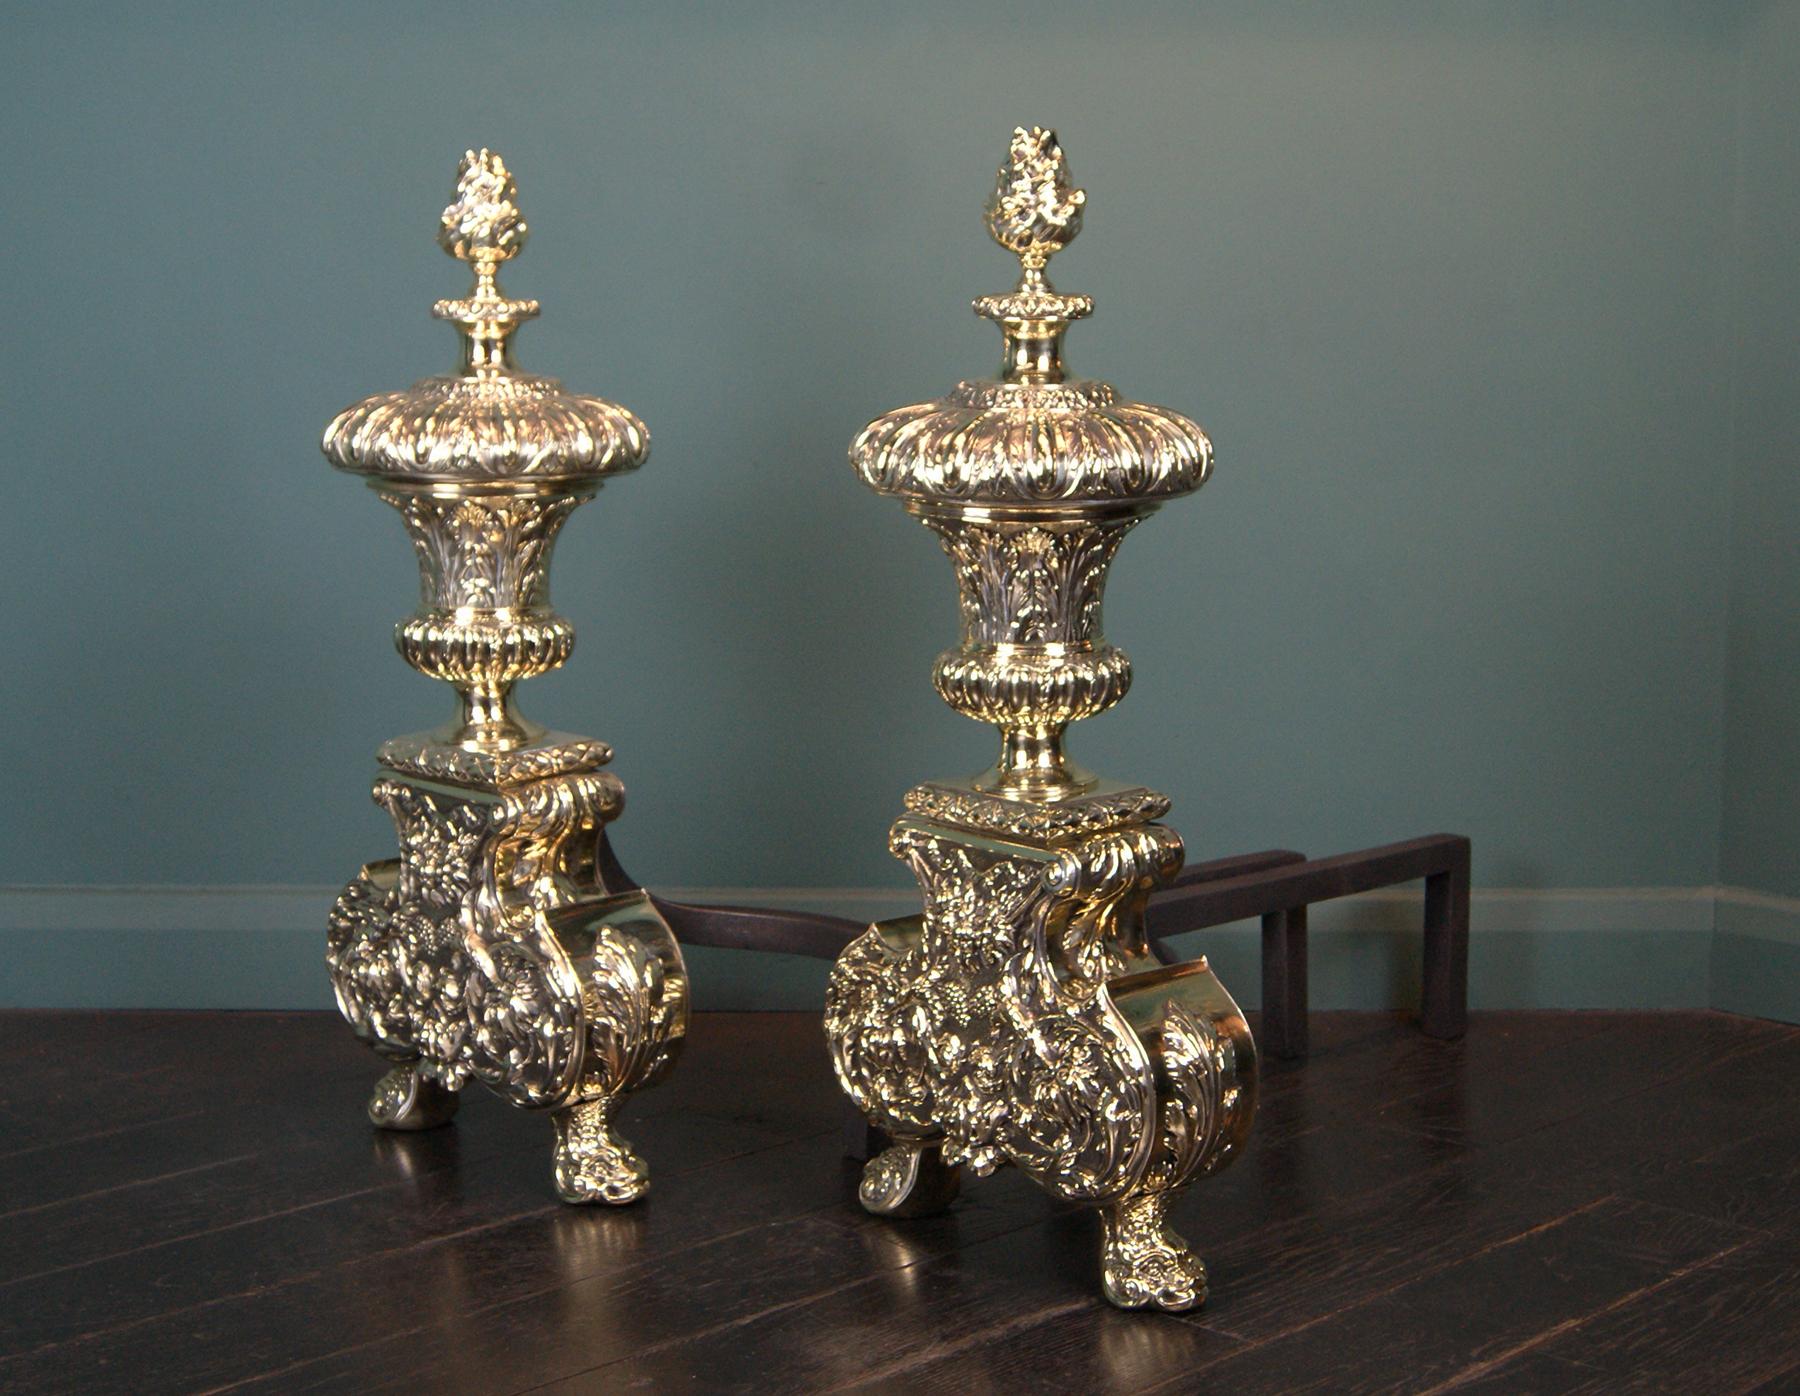 A beautifully-made pair of brass English andirons, with gadrooned urns surmounted by flame-topped finials. The substantial base supports with scrolled foliage and fruit in relief, on stylised dolphin feet. This set of andirons are near identical to